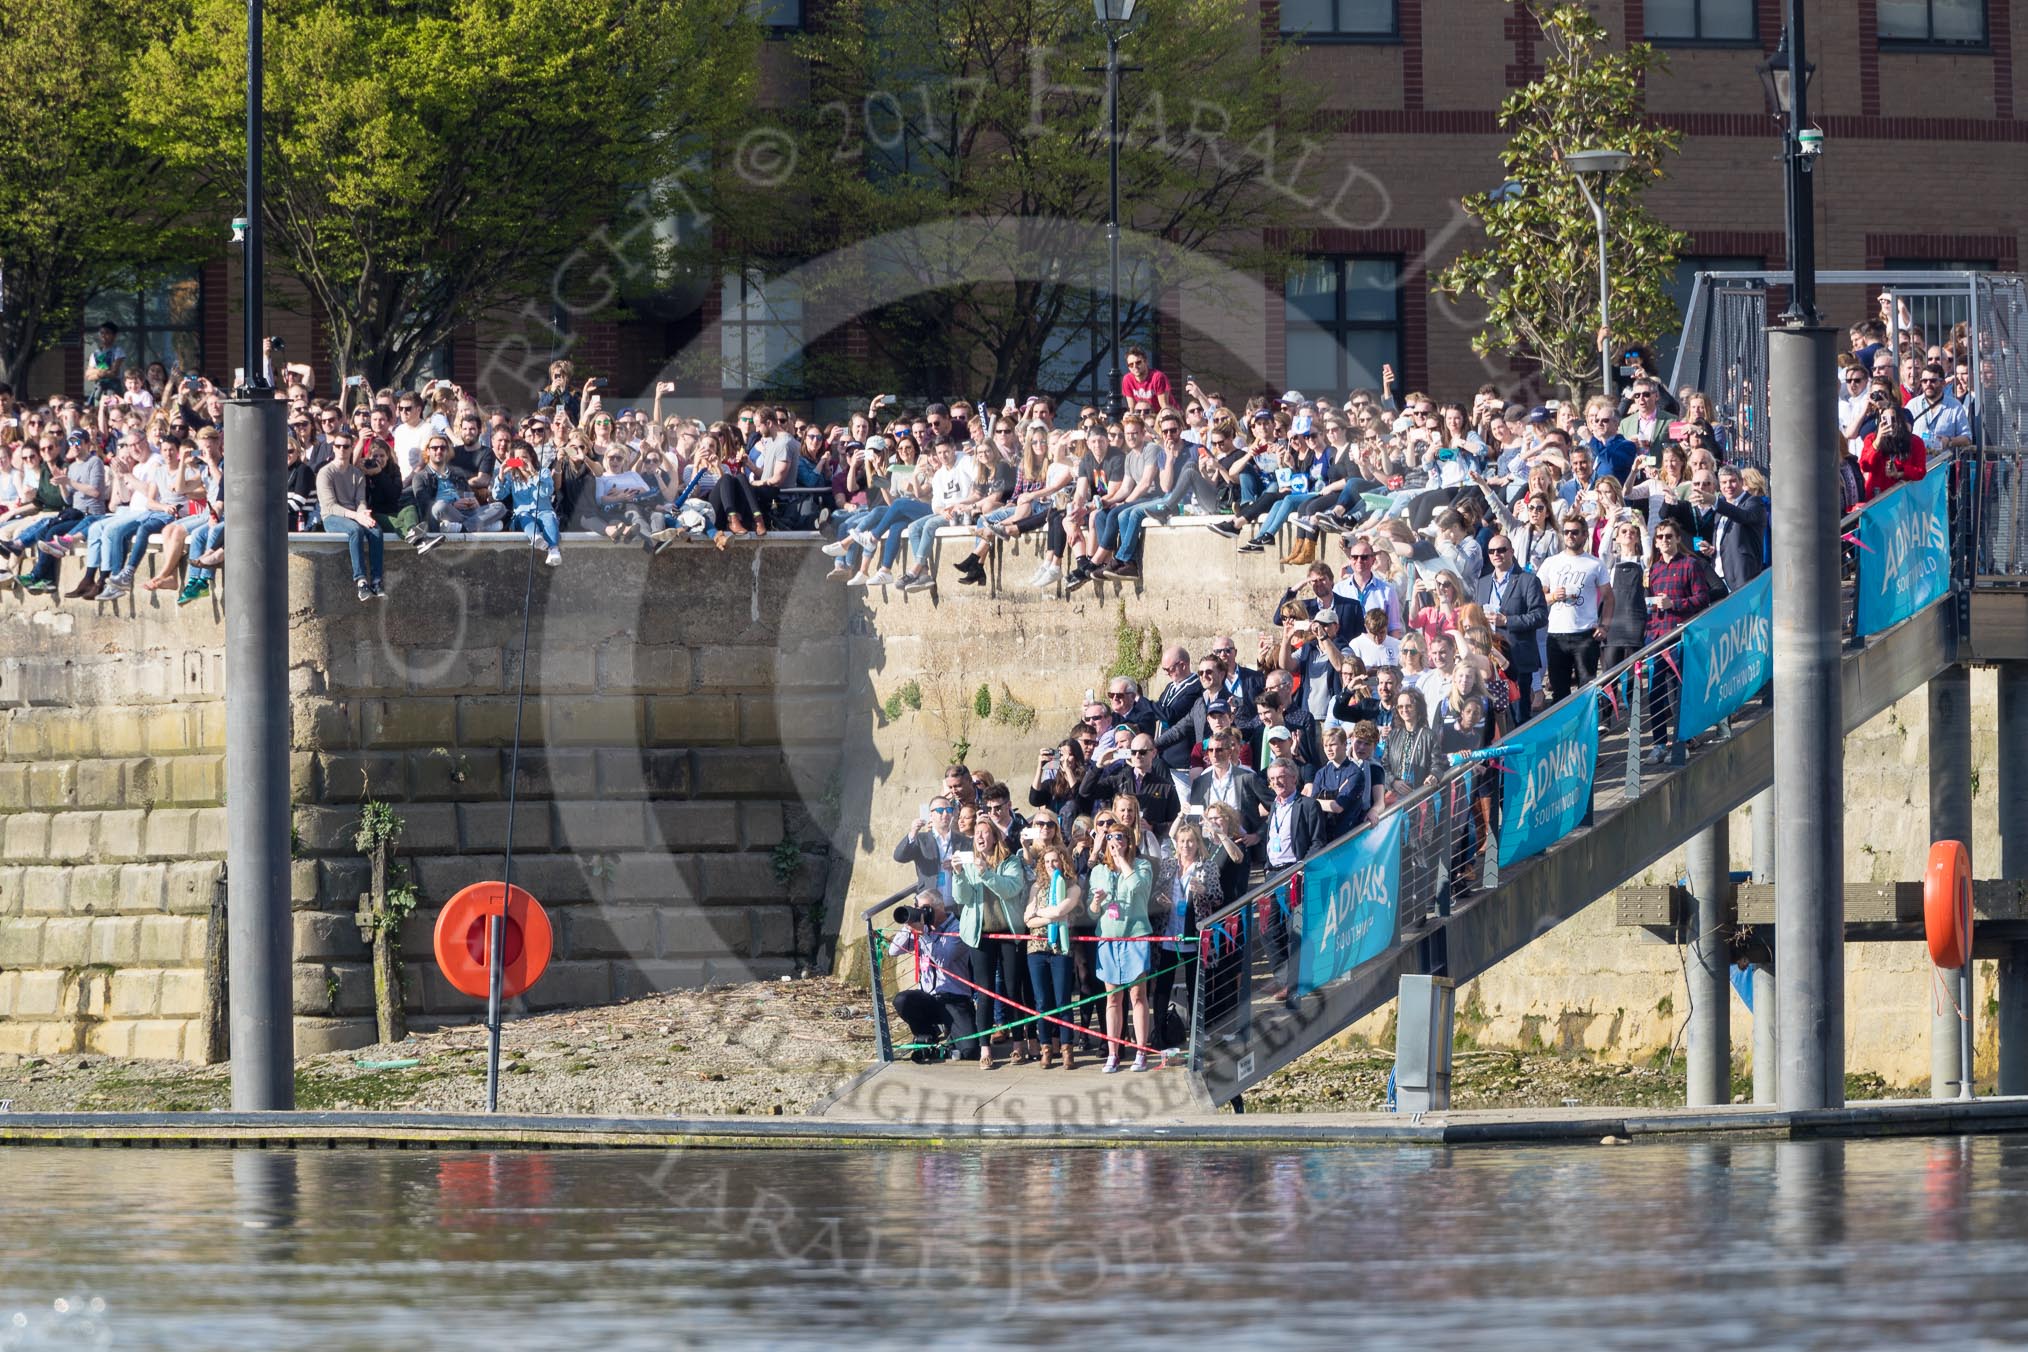 The Boat Race season 2017 -  The Cancer Research Women's Boat Race: Large crowds on the Thames Path at Fulham Reach - some might get wet when the flotilla has got past them.
River Thames between Putney Bridge and Mortlake,
London SW15,

United Kingdom,
on 02 April 2017 at 16:41, image #154